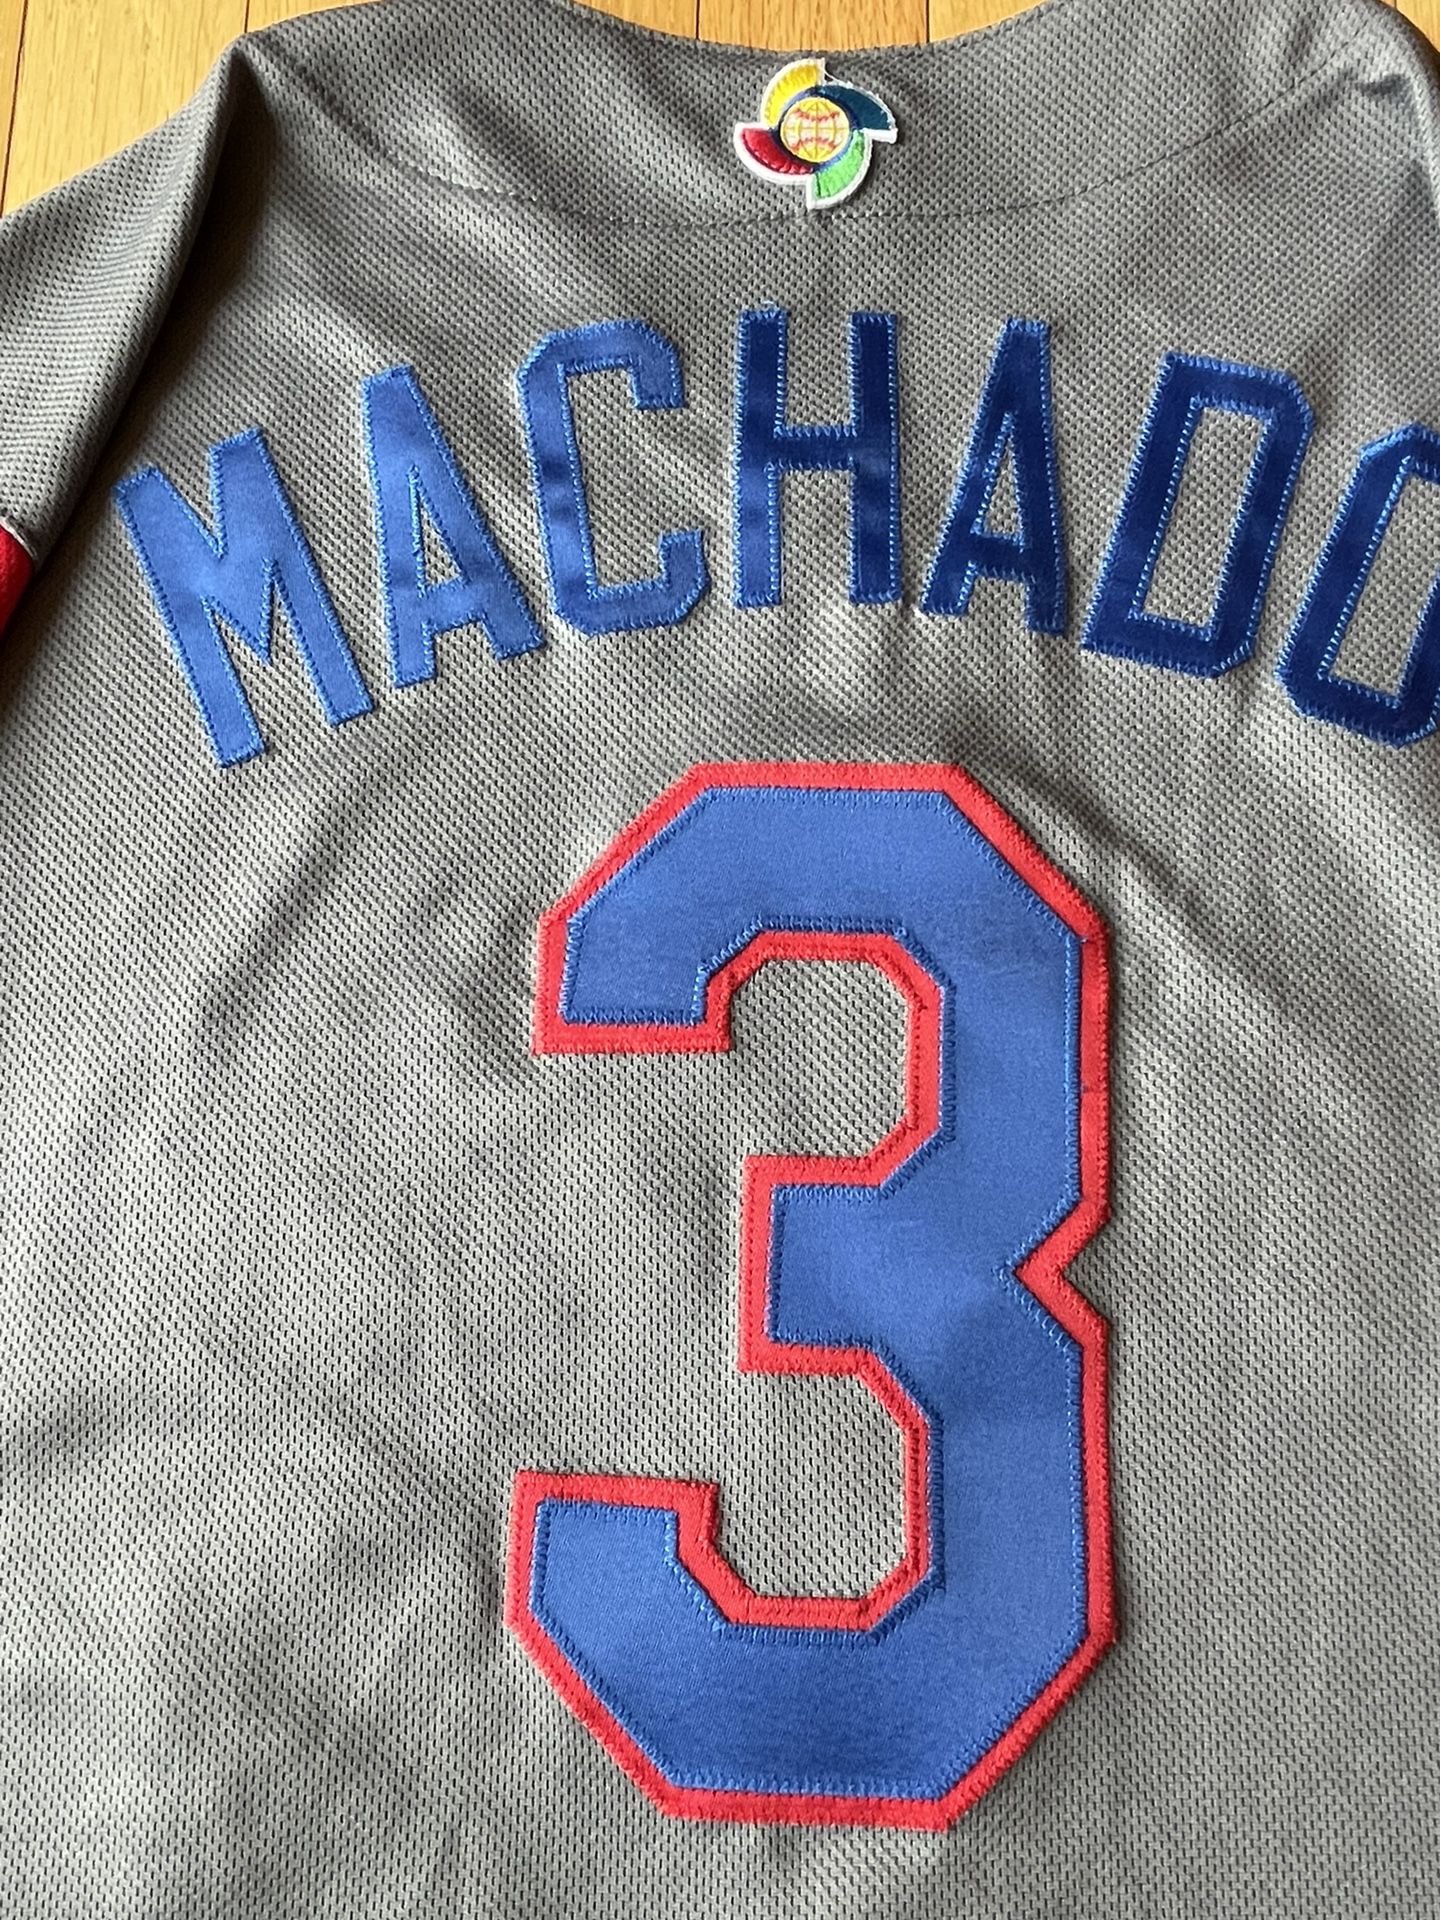 2017 WBC Team Dominicana Manny Machado Majestic Jersey Dominican Size 44  for Sale in New Carrolltn, MD - OfferUp